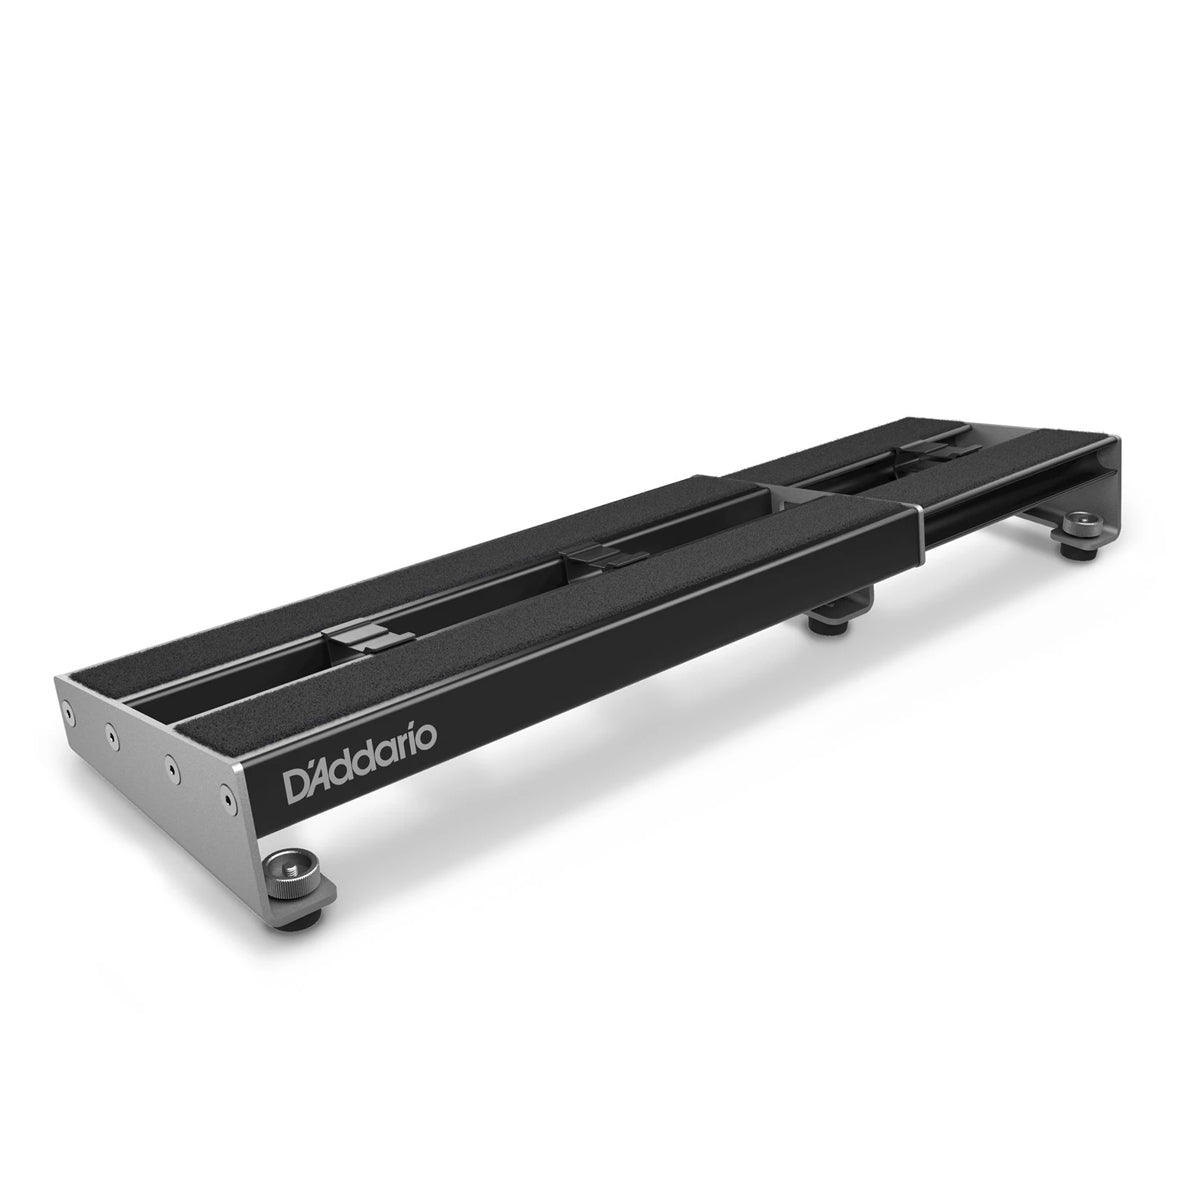 D'Addario PWXPNDPB01 XPND 1 Pedal Board Single Row with Transport Case